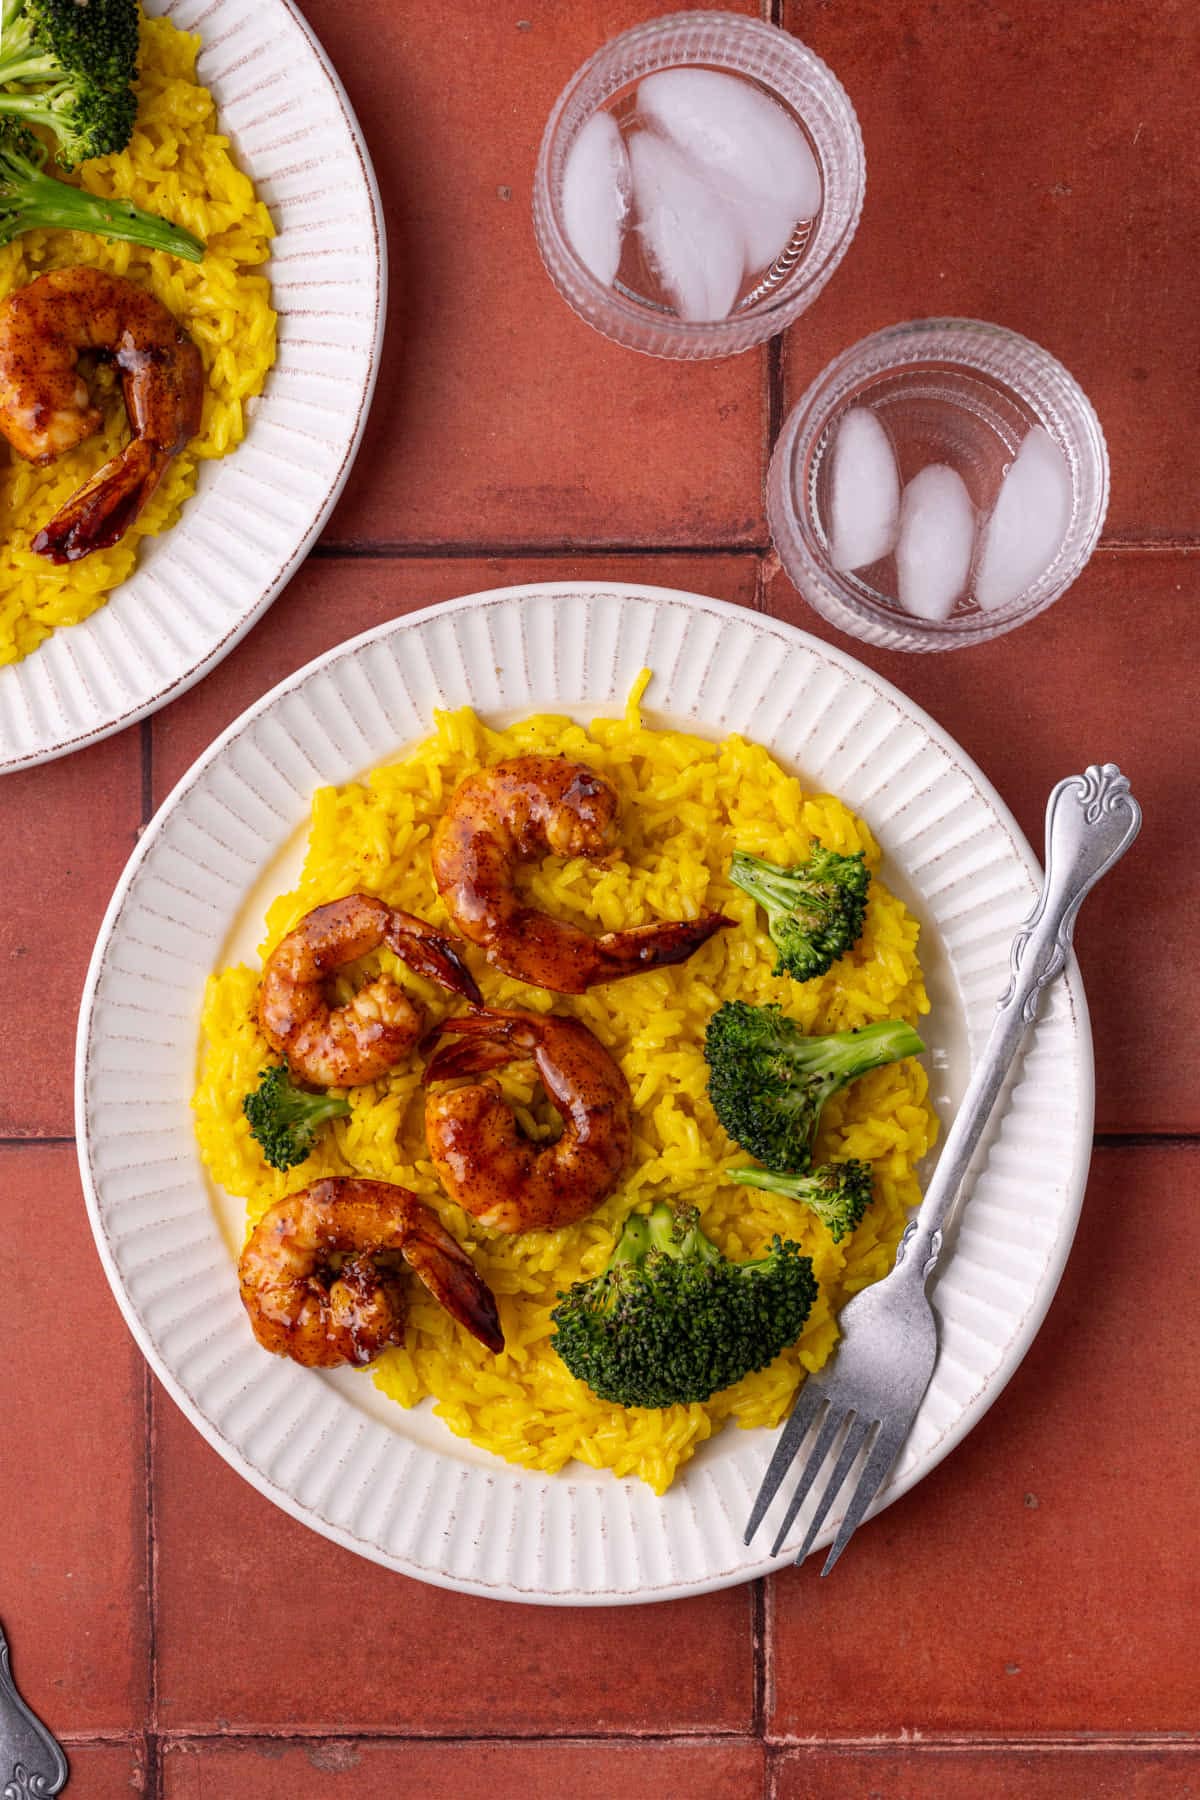 Overhead image of plate with rice, broccoli, and shrimp. 